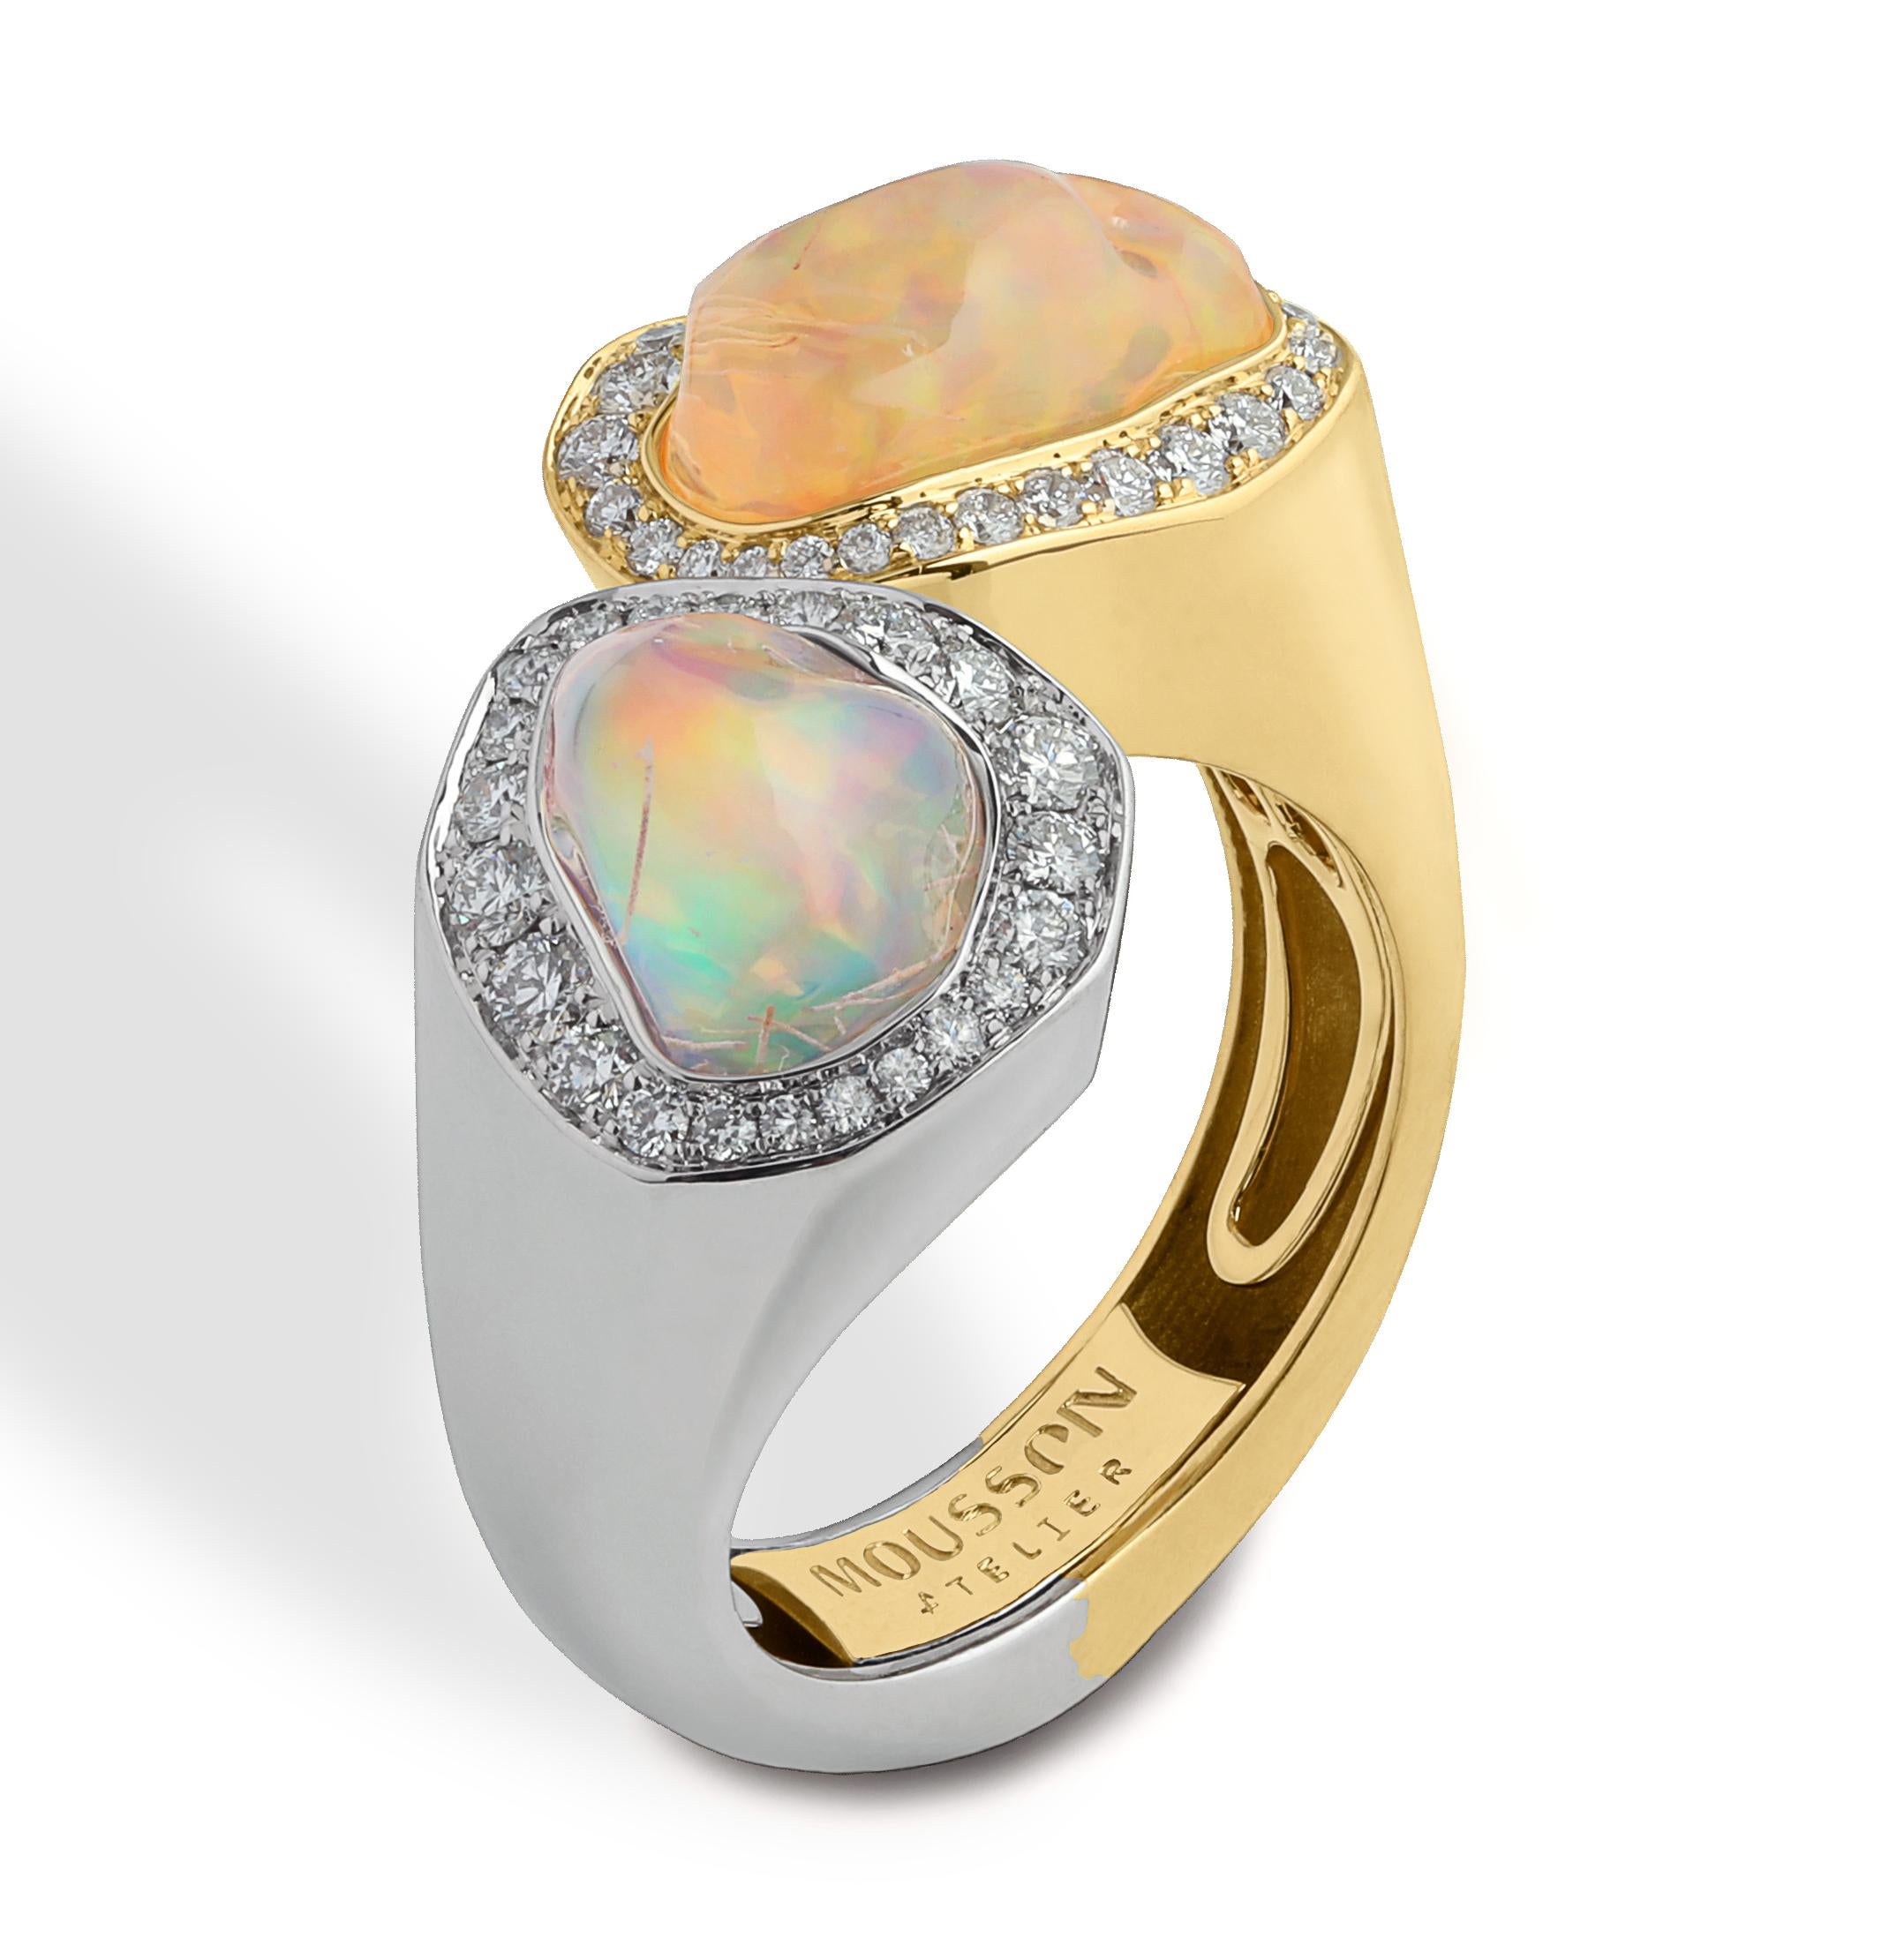 Mexican Opal 5.84 Carat Diamonds One of a Kind 18 Karat Yellow White Gold Ring
Opals, unlike many other stones, are almost impossible to cut, they are always unique. Therefore, jewelry with Opals is always improvisation. It also happened with this